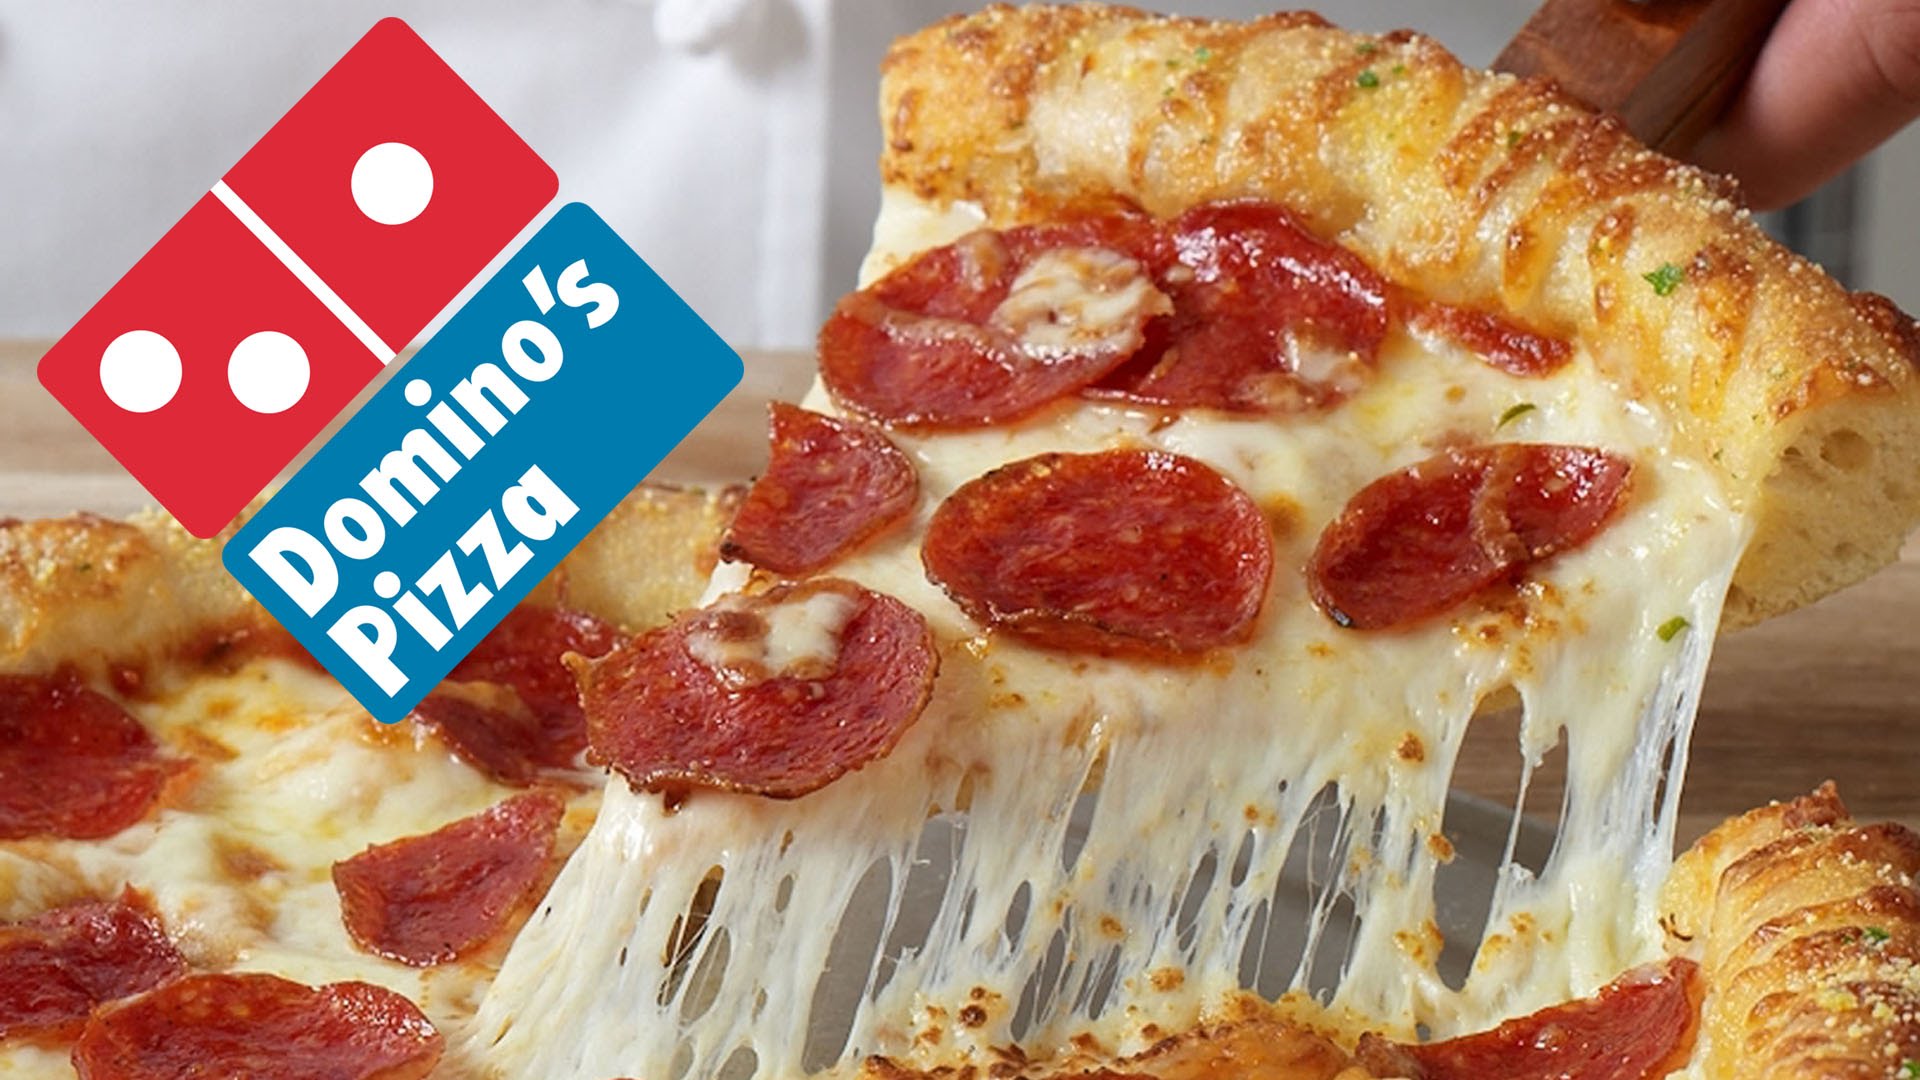 $50 Domino’s Pizza Gift Card Only $40! Plus, Choose Any 2 or More for $5.99 Each Deal!